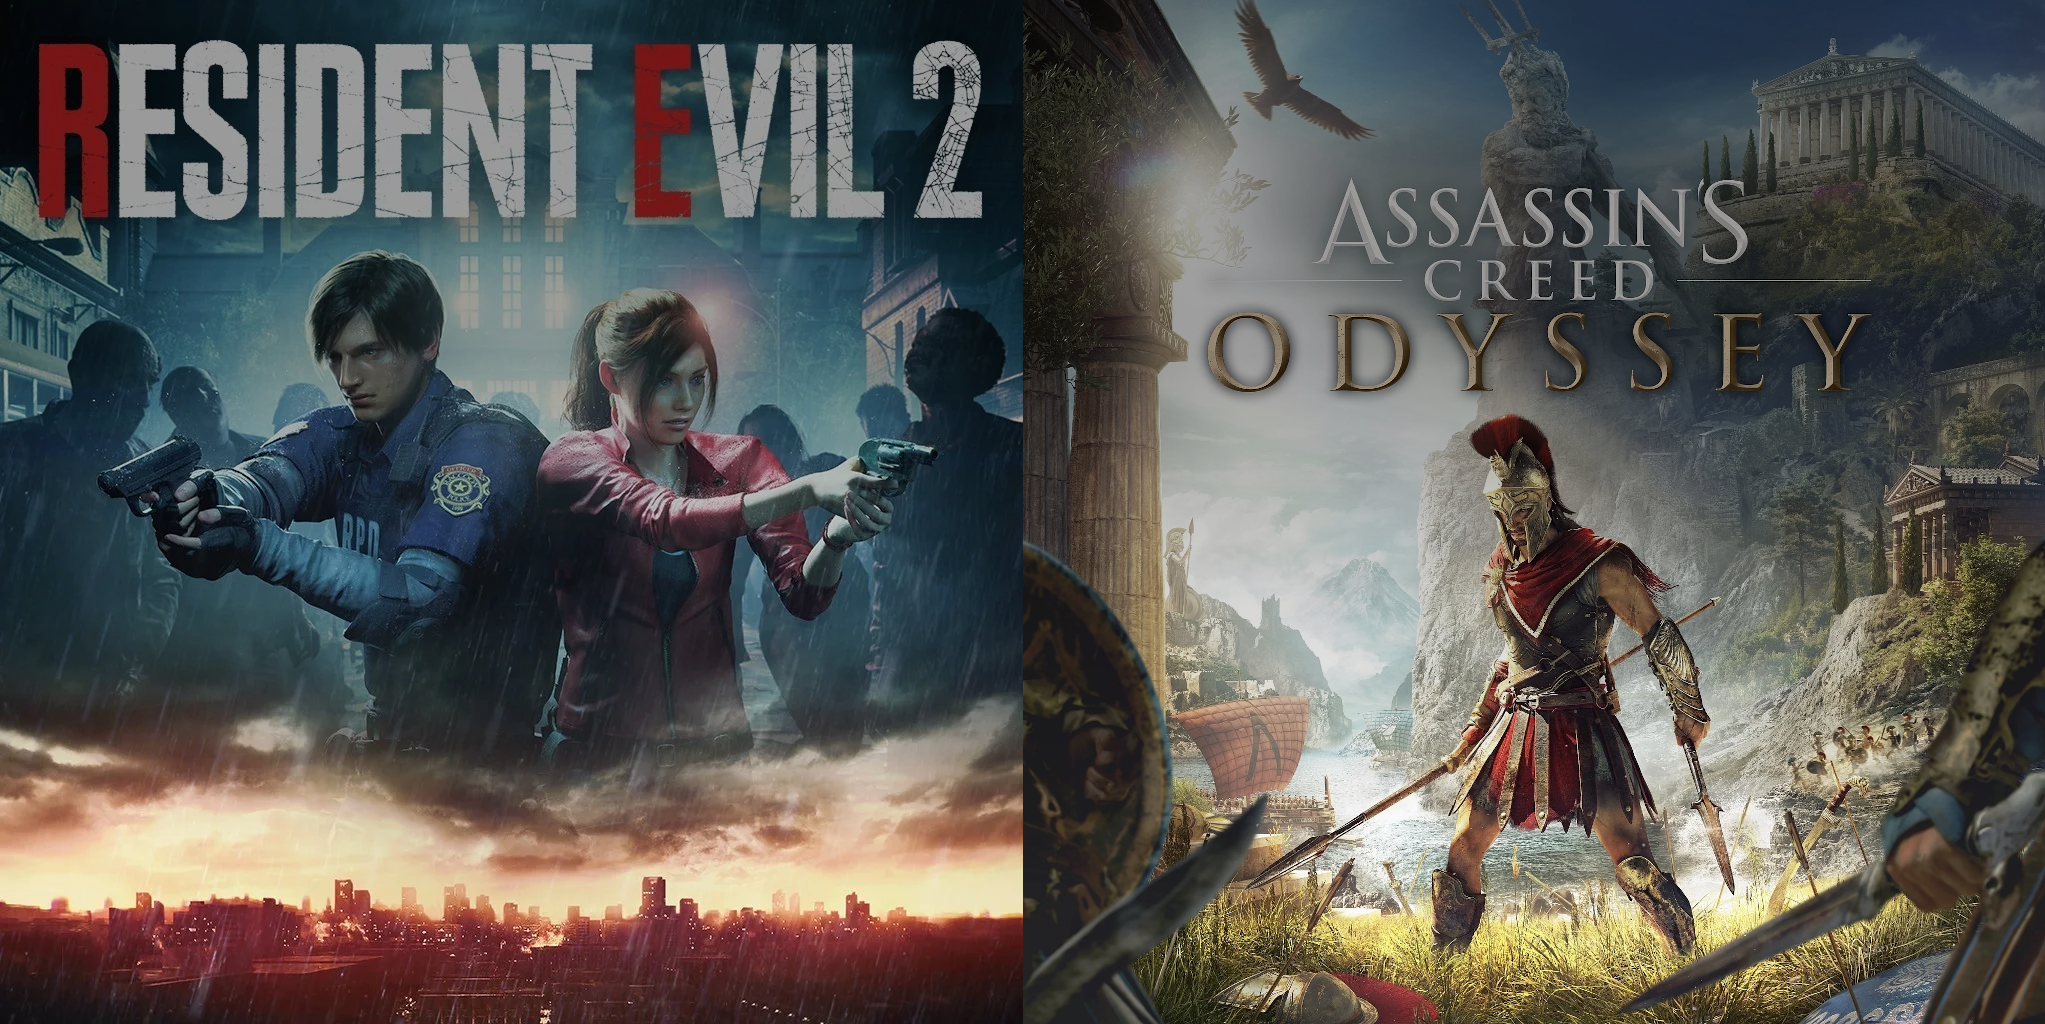 Linux Gaming Reviews: RE2 Remake and Assassin's Creed Odyssey